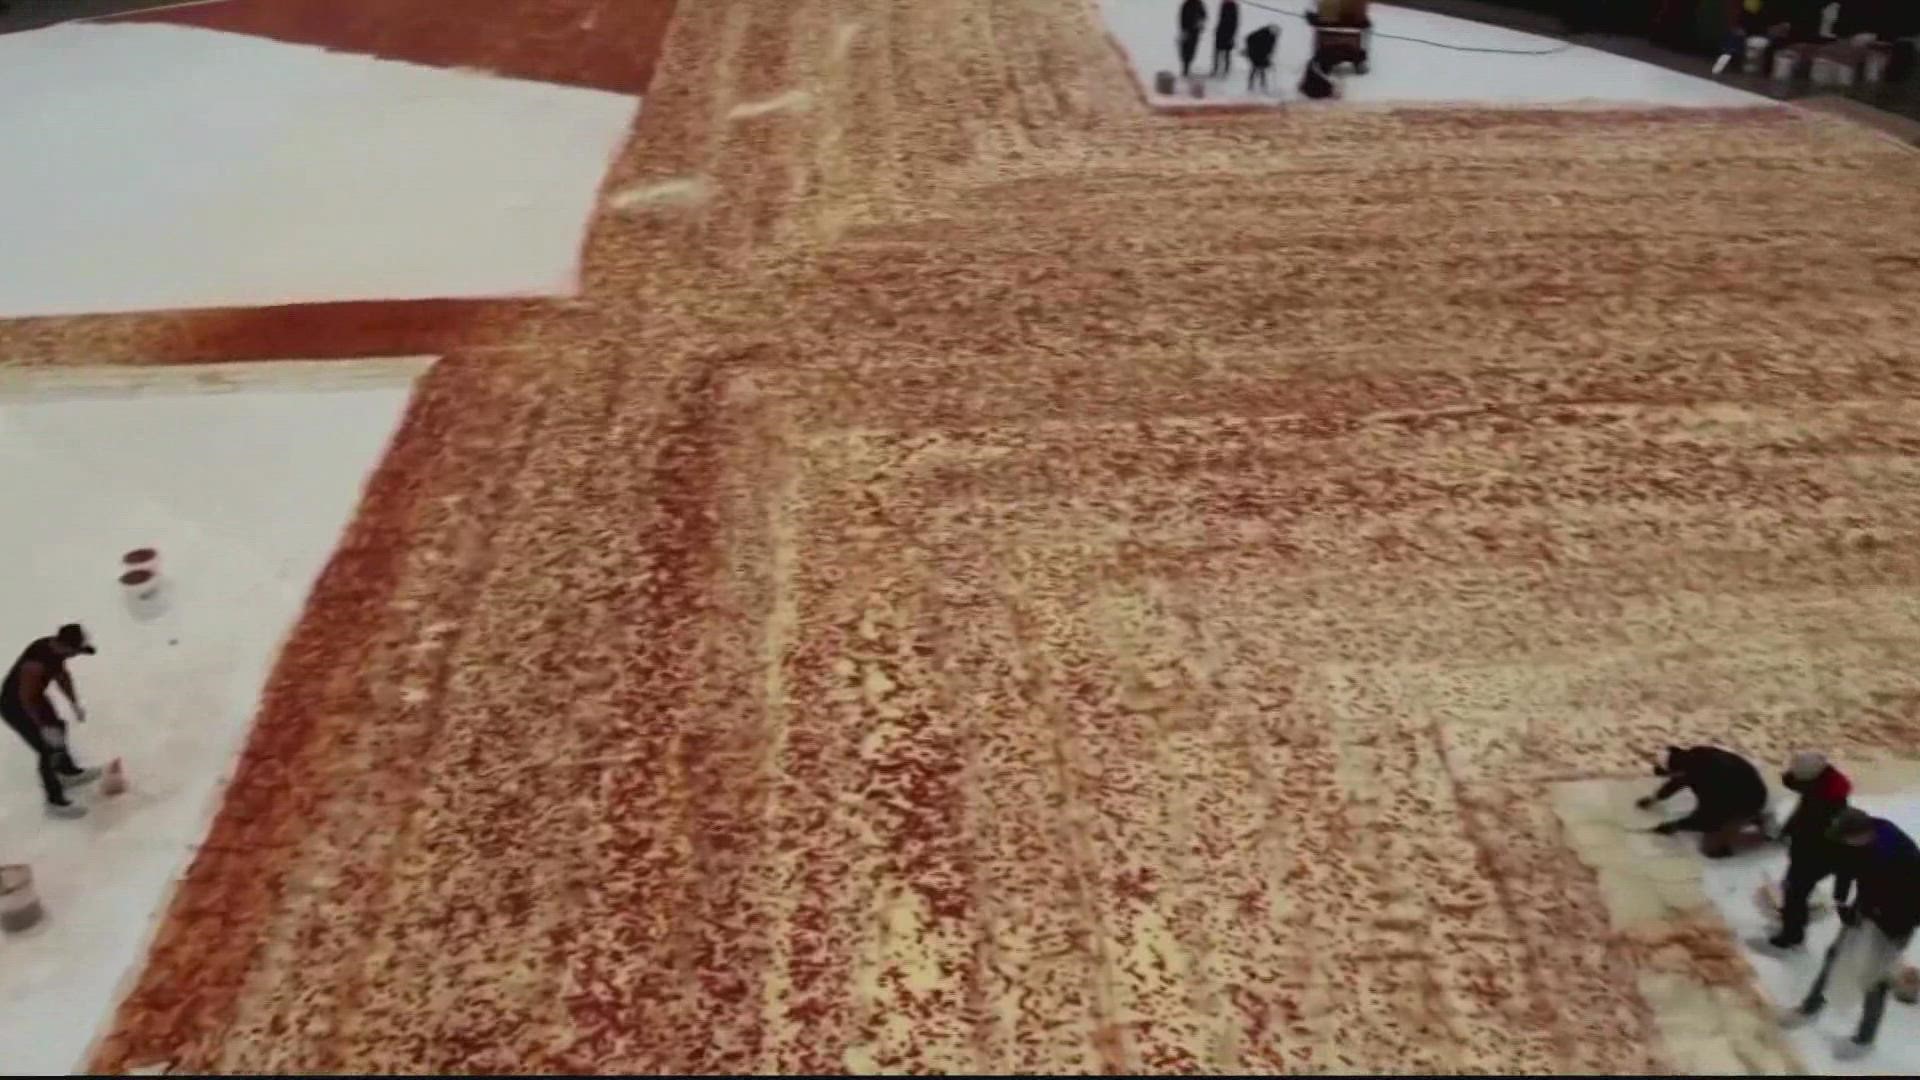 The pizza covers about 14-thousand square feet.  That's roughly 68-thousand slices. Pizza Hut organized all this - hoping to get into the record books.